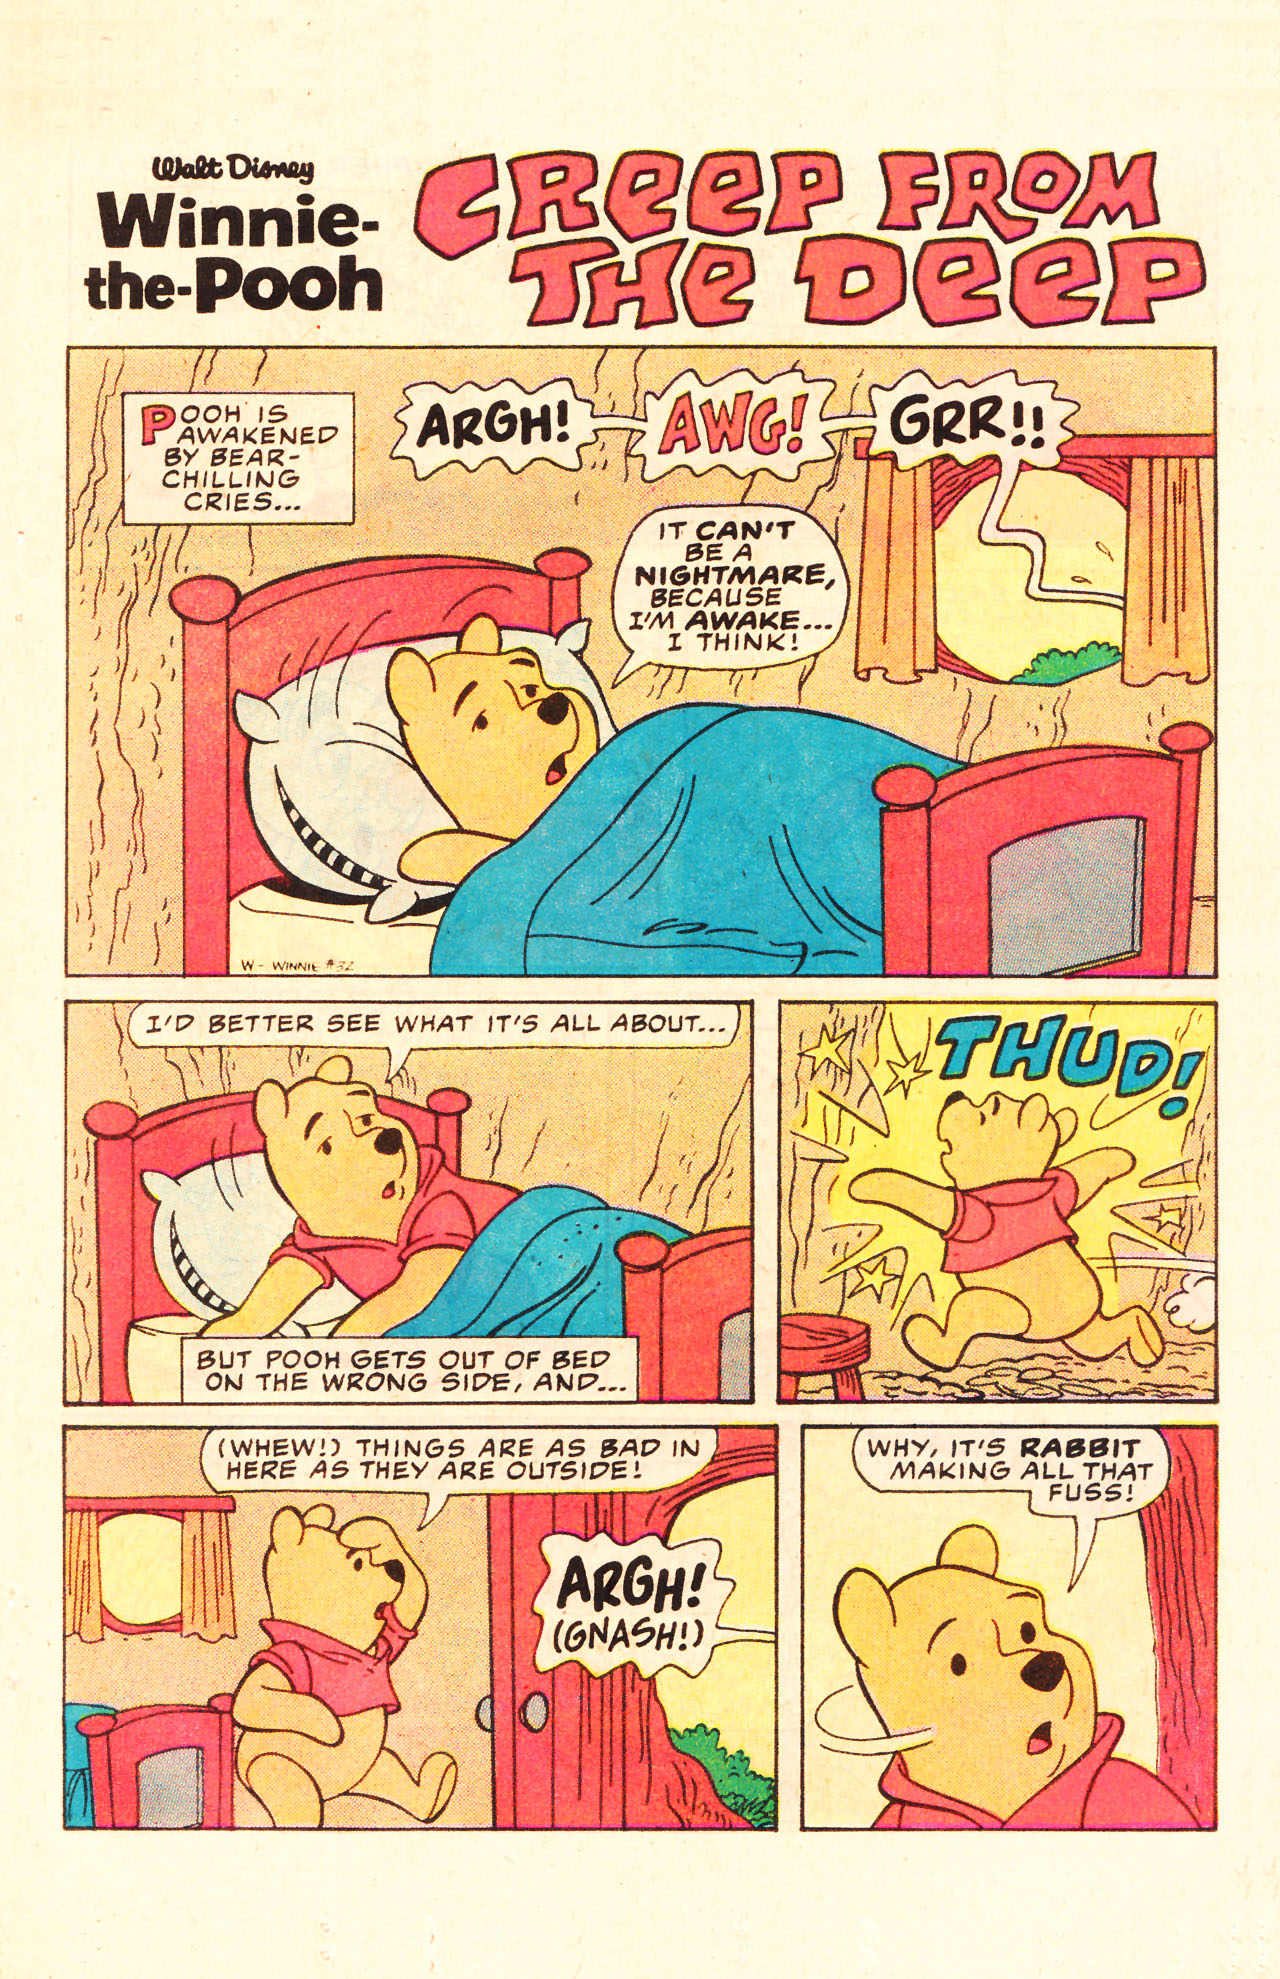 Read online Winnie-the-Pooh comic -  Issue #32 - 11